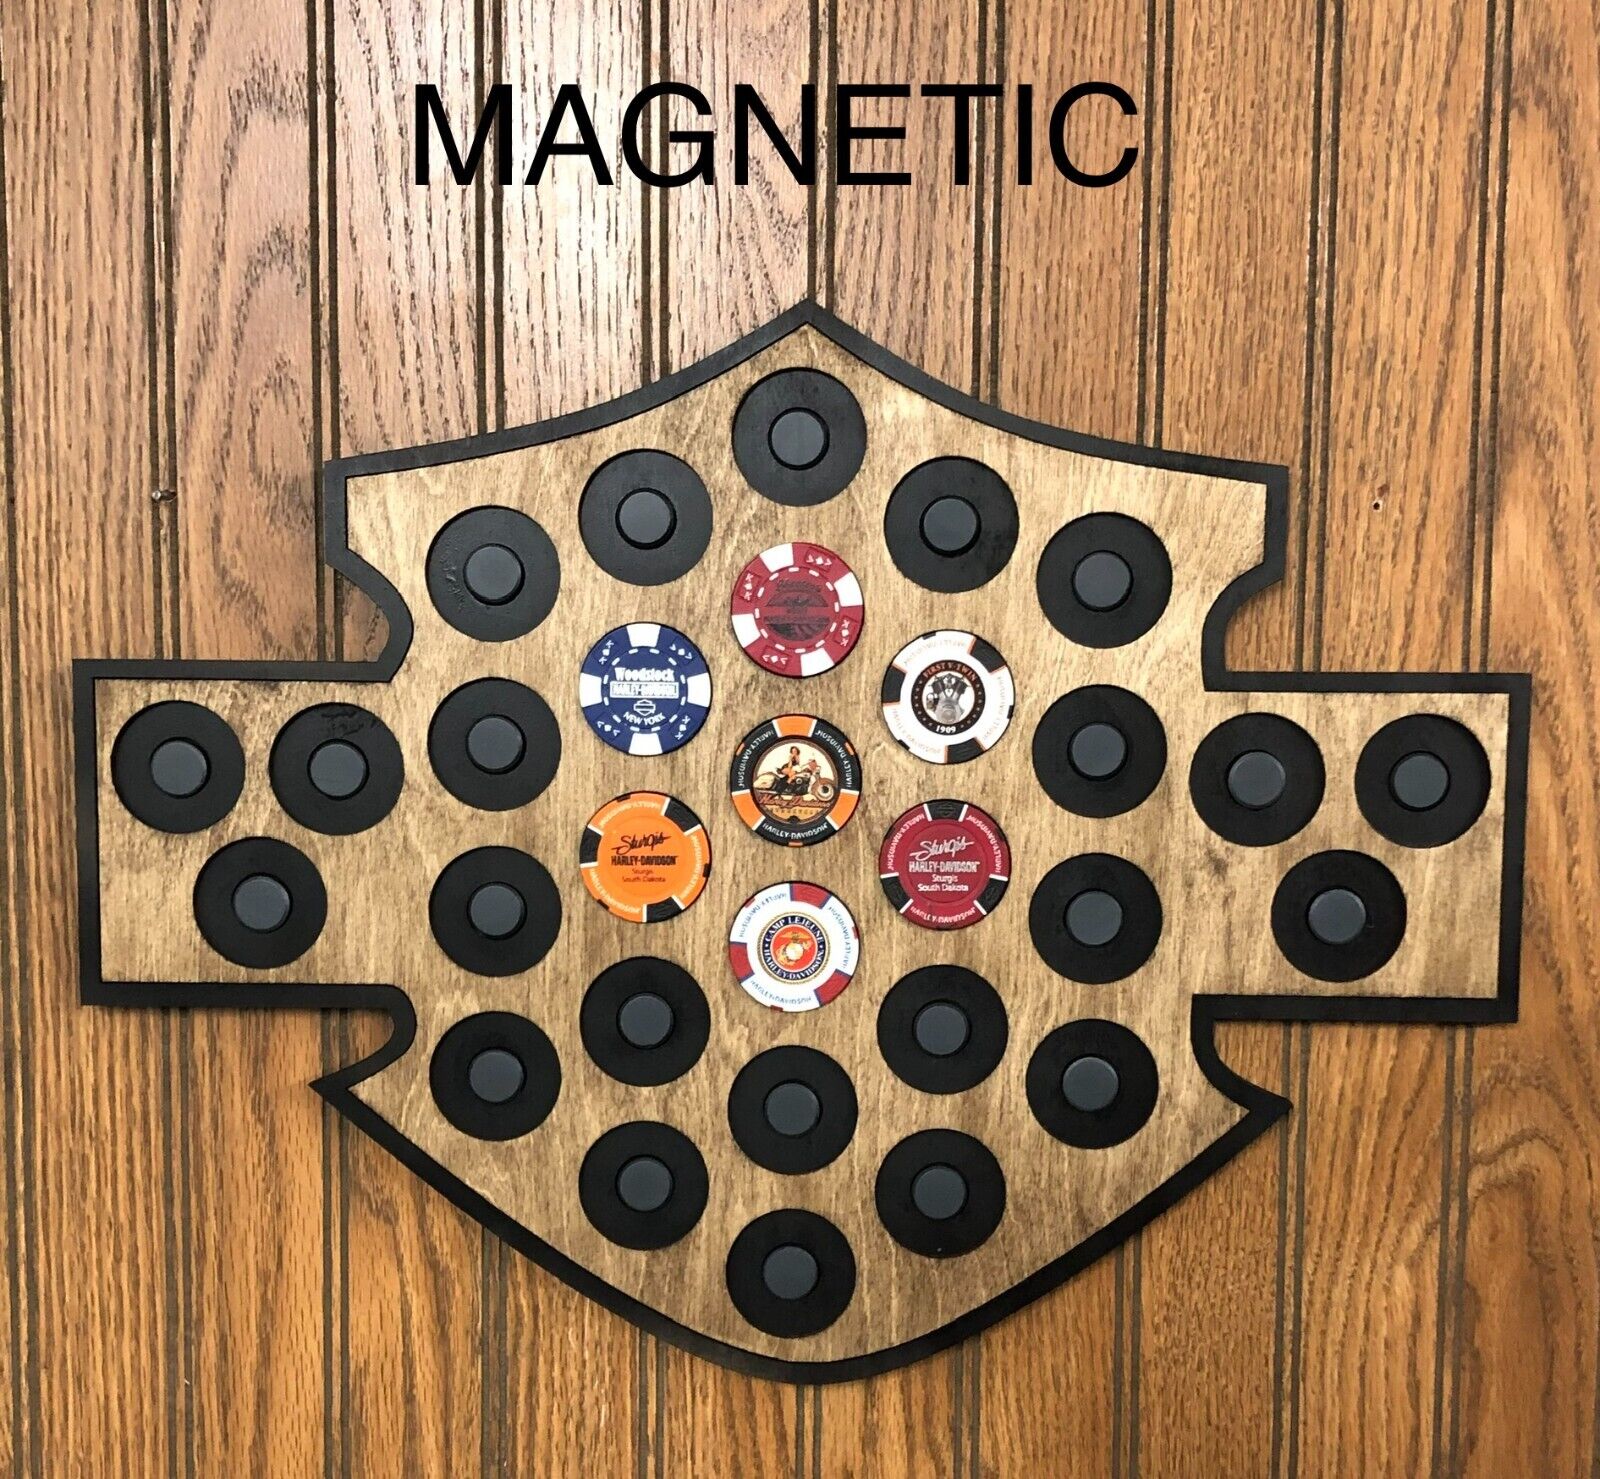 Magnetic Harley Poker Chip Display Holds 30 Chips